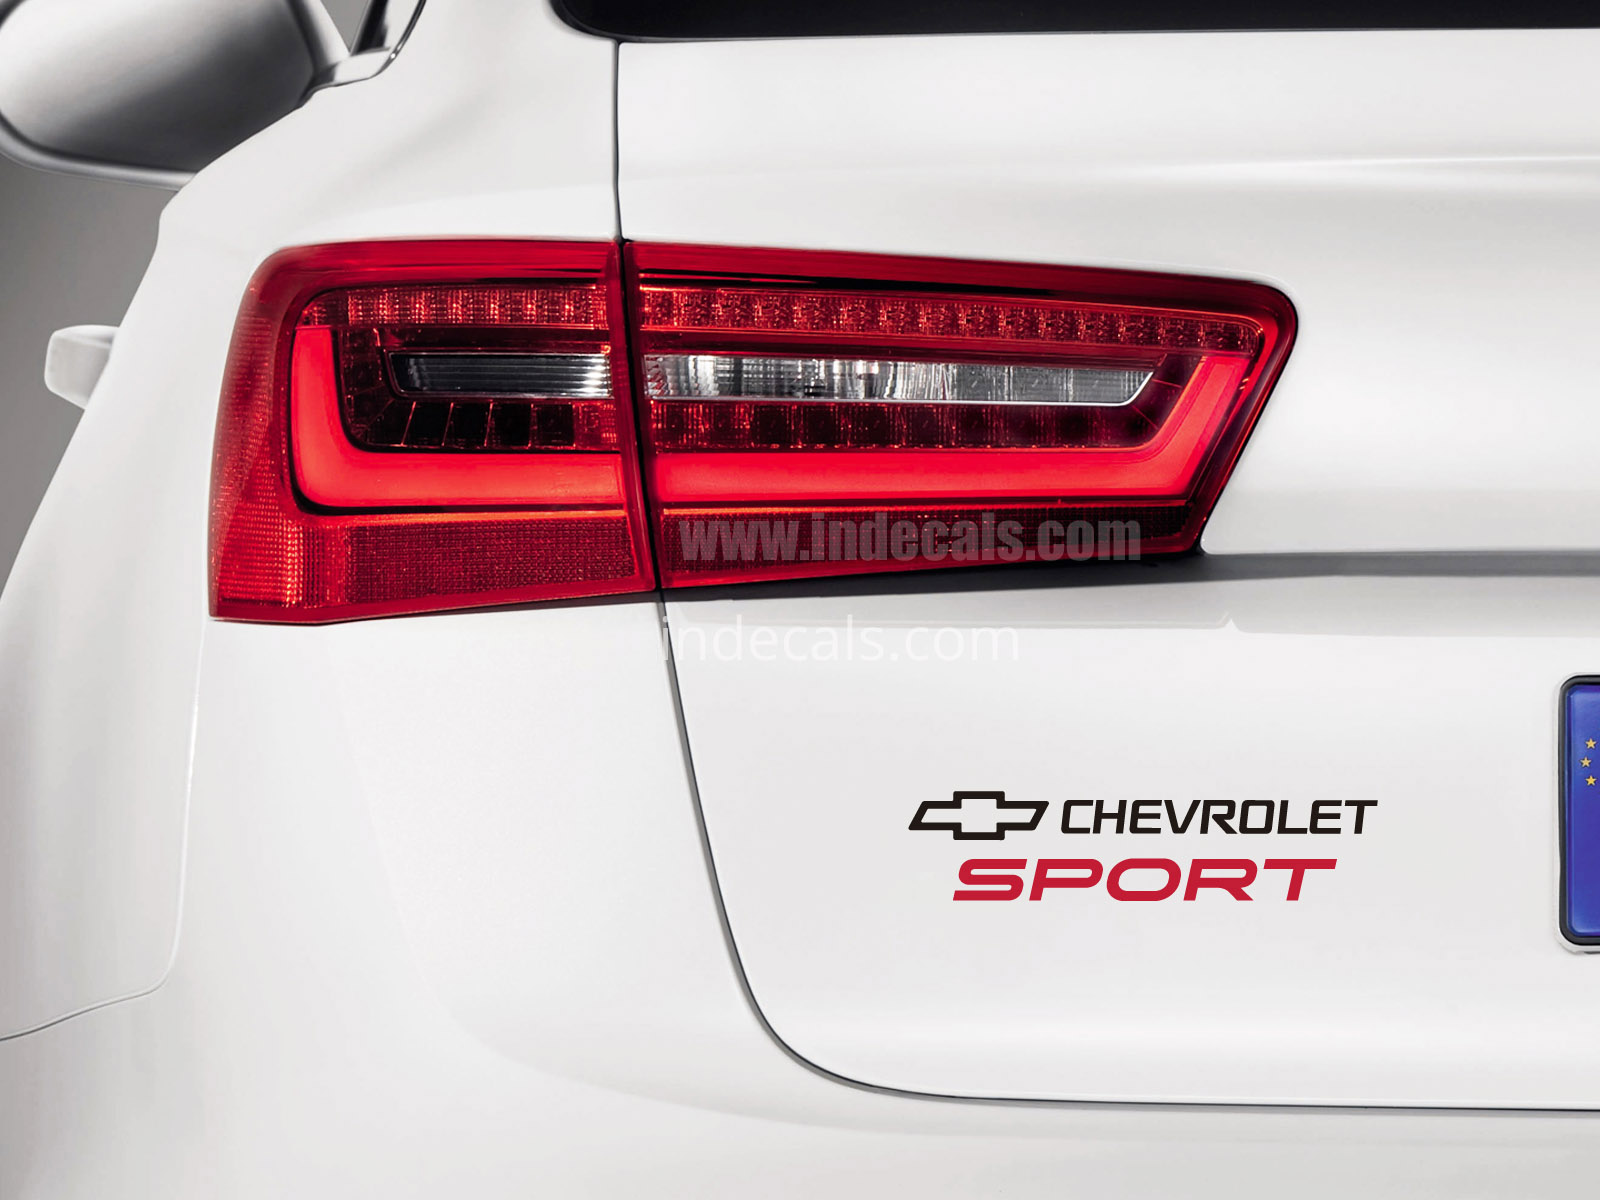 1 x Chevrolet Sports Sticker for Trunk - Black & Red